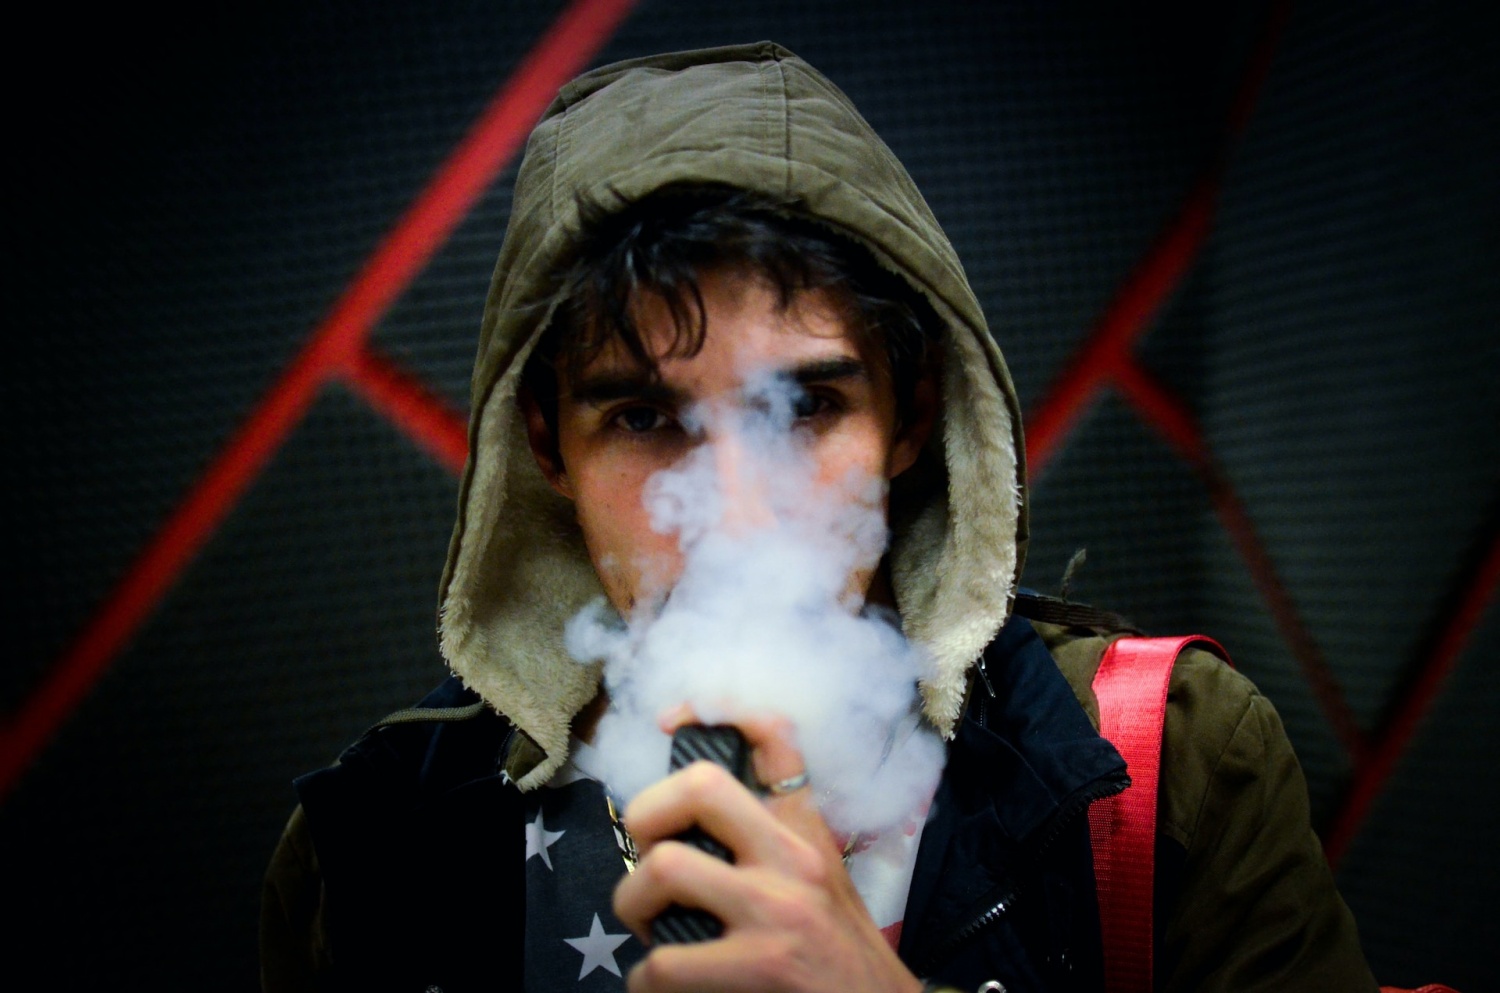 Researchers Want to Determine How Pro-Vaping Content Affects Young People